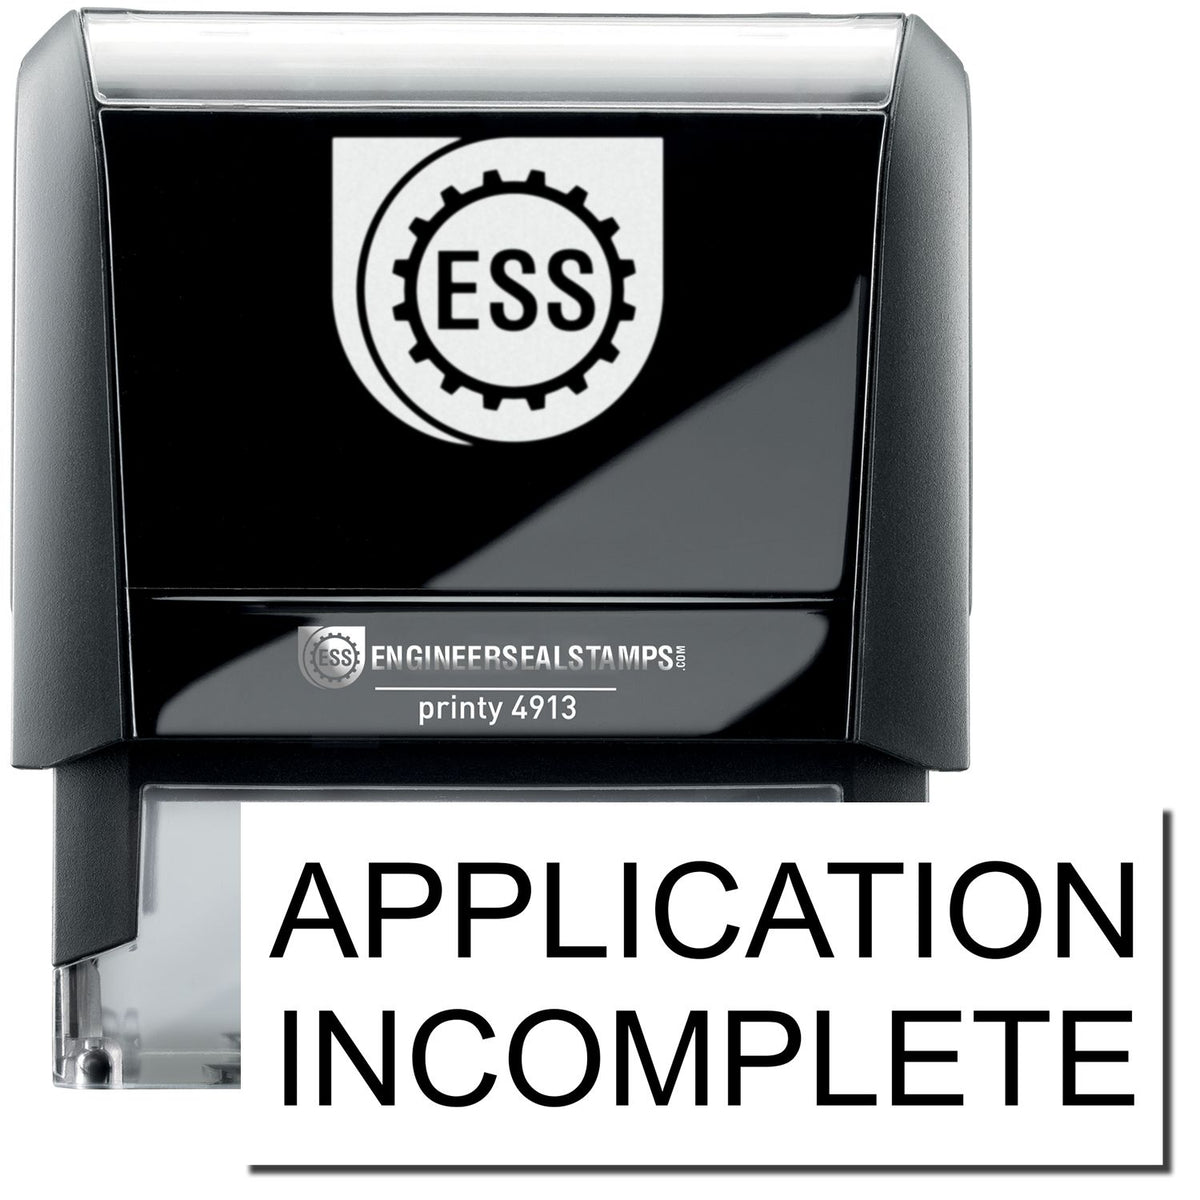 A self-inking stamp with a stamped image showing how the text &quot;APPLICATION INCOMPLETE&quot; in a large bold font is displayed by it.